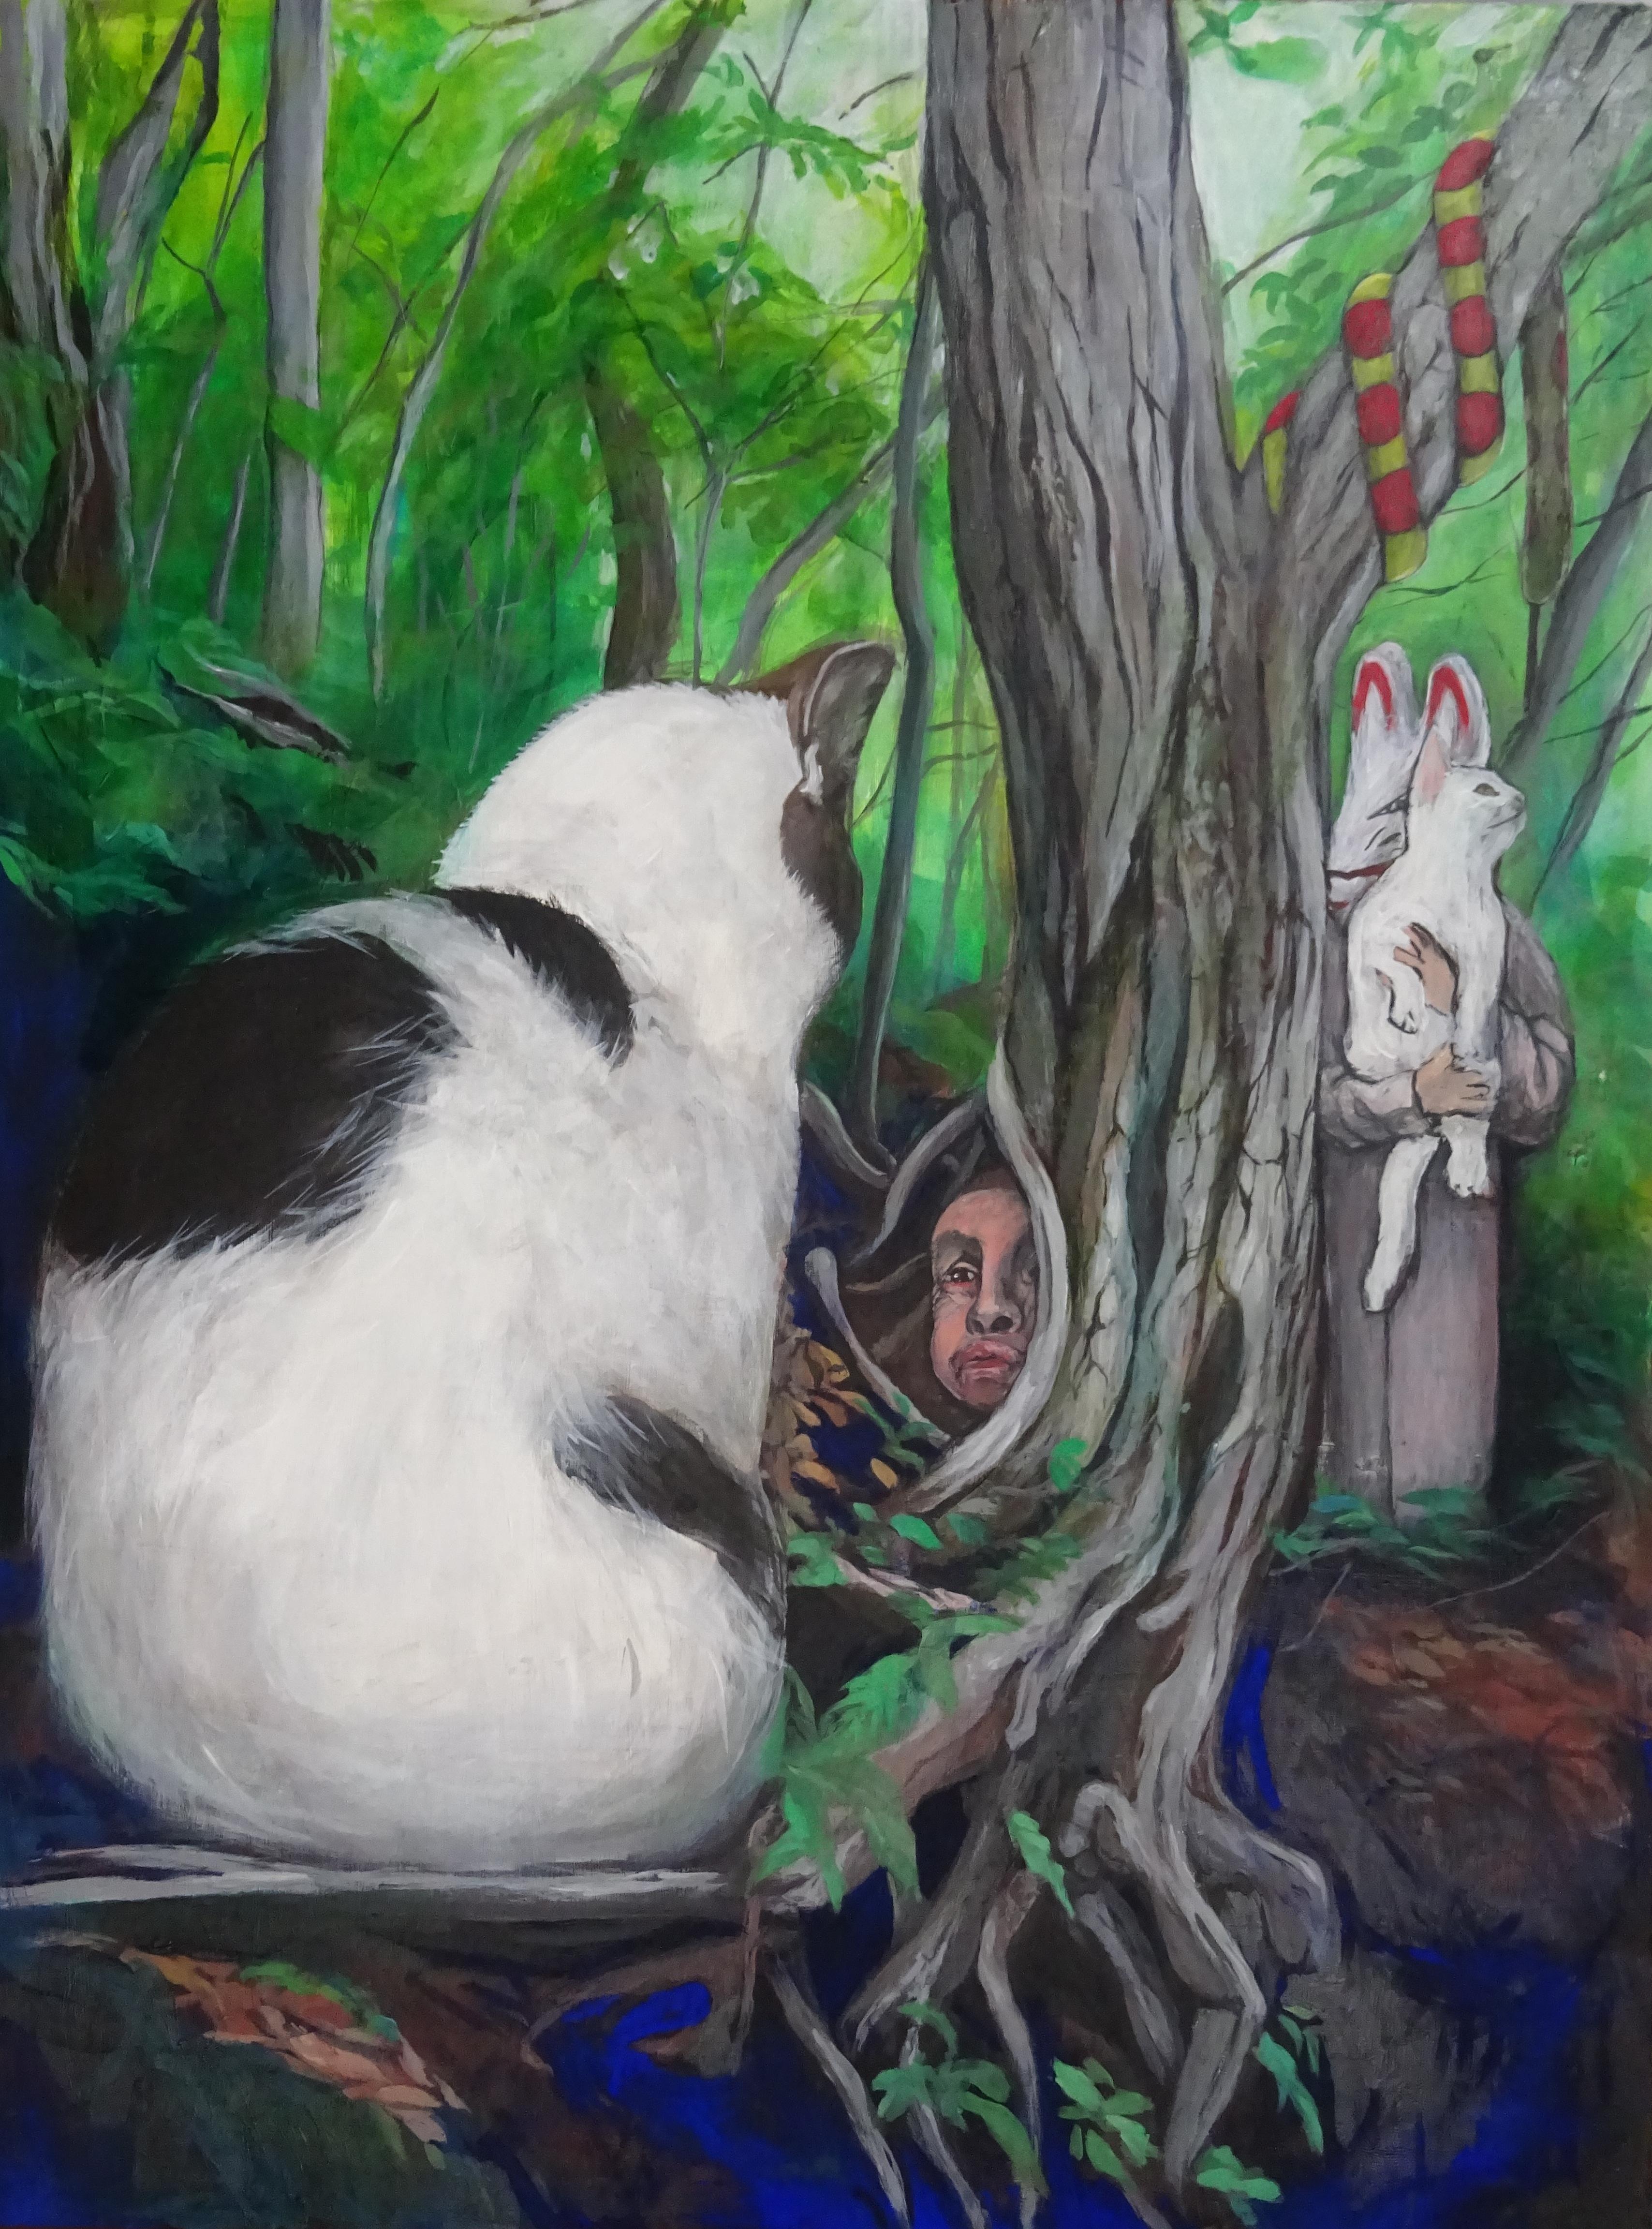 Dream of a Giant Cat - Symbolism Dream unconscious experience painting - Painting by Uki Otake